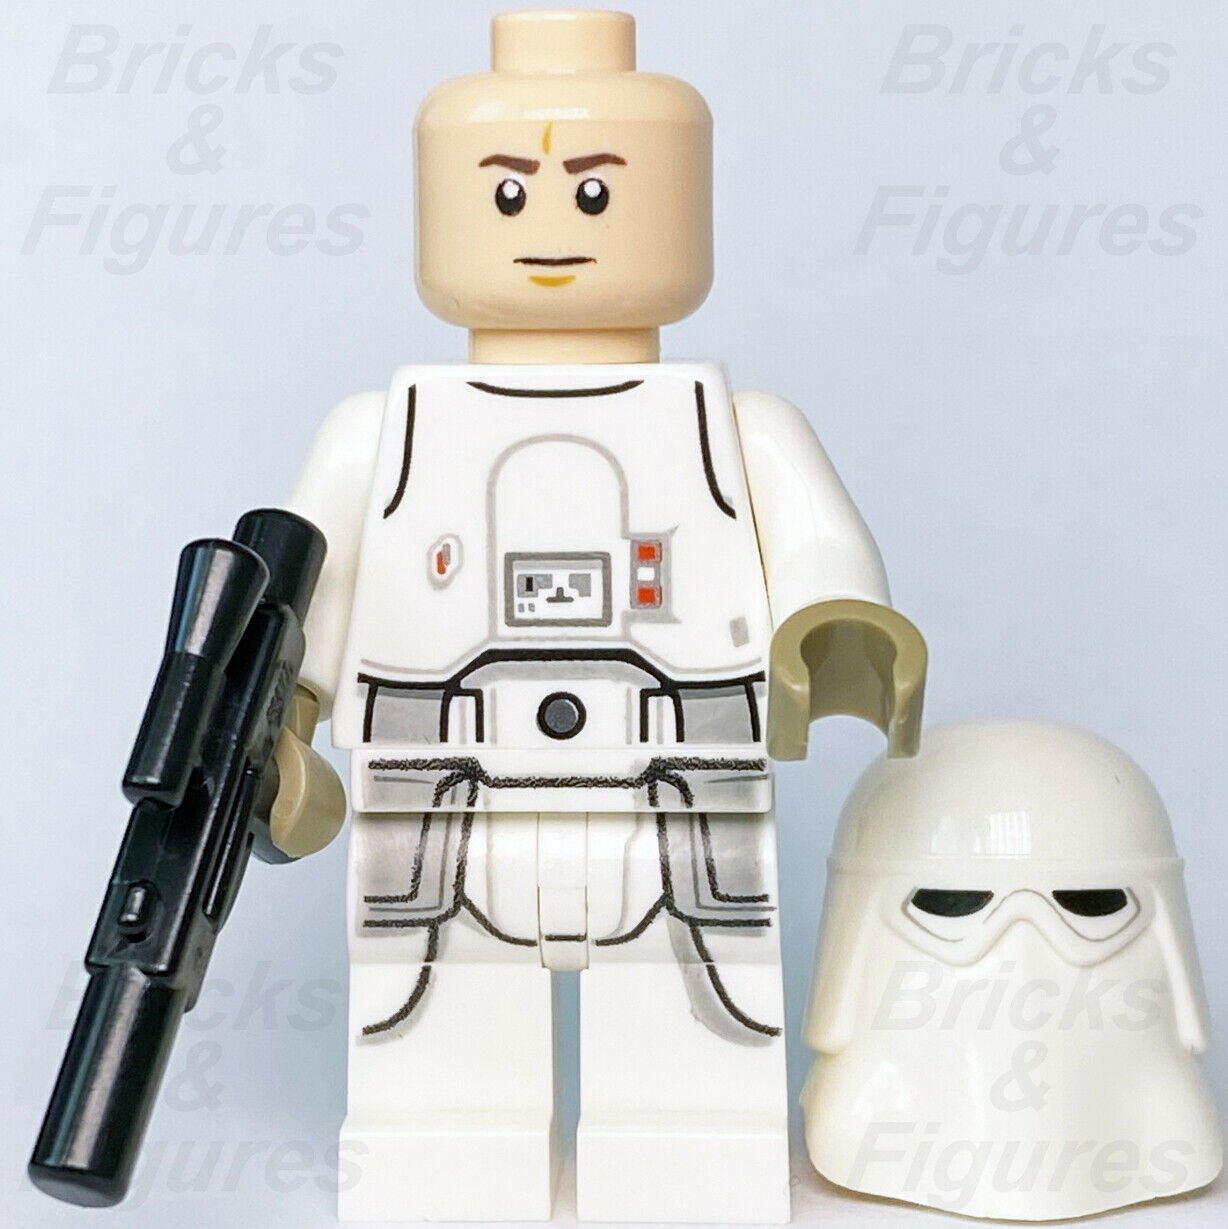 New Star Wars LEGO Hoth Snowtrooper with Frown Imperial Minifigure 75288 sw1102 - Bricks & Figures